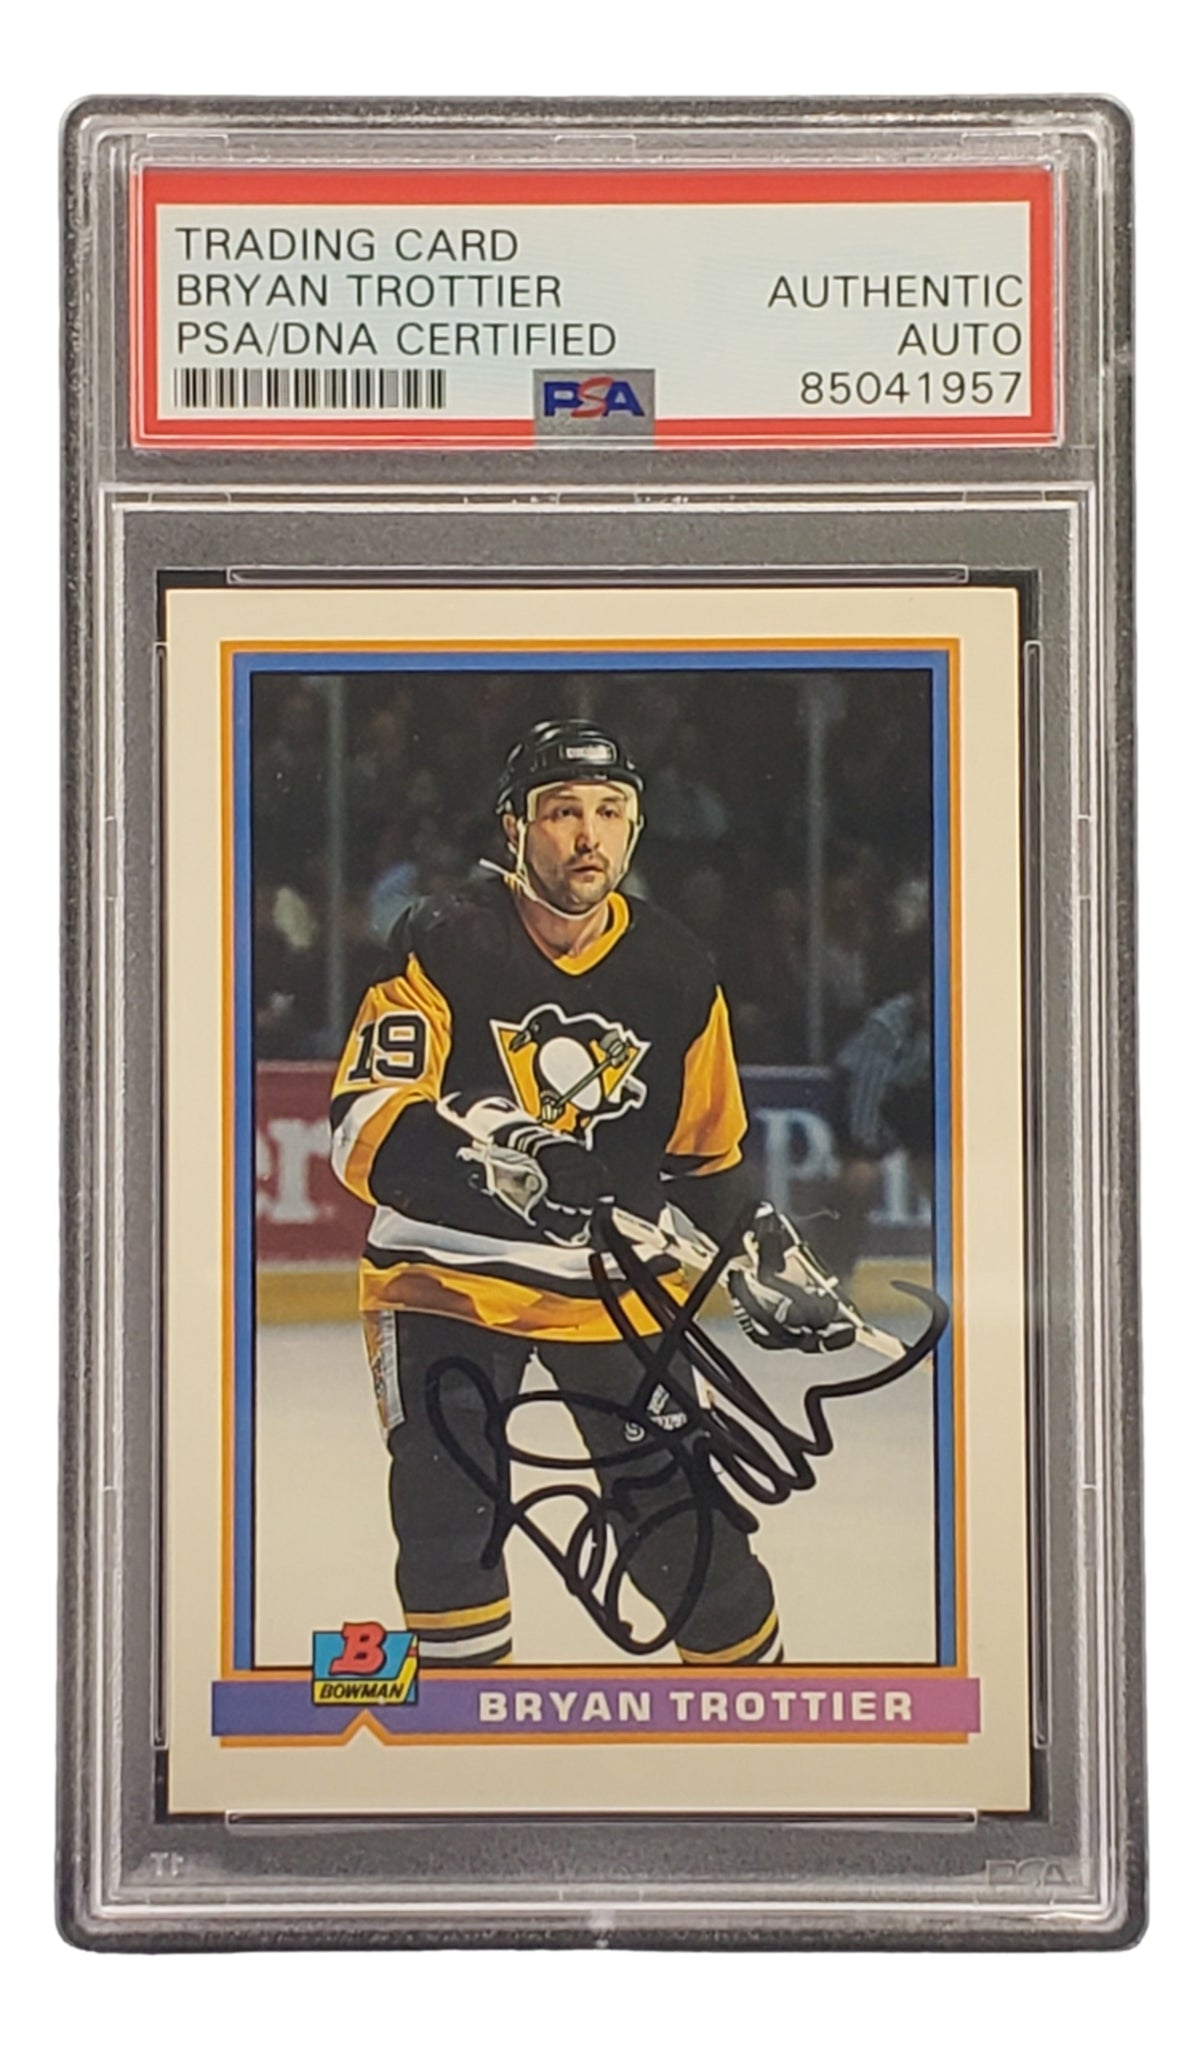 Bryan Trottier autographed hockey card (Pittsburgh Penguins) 1990